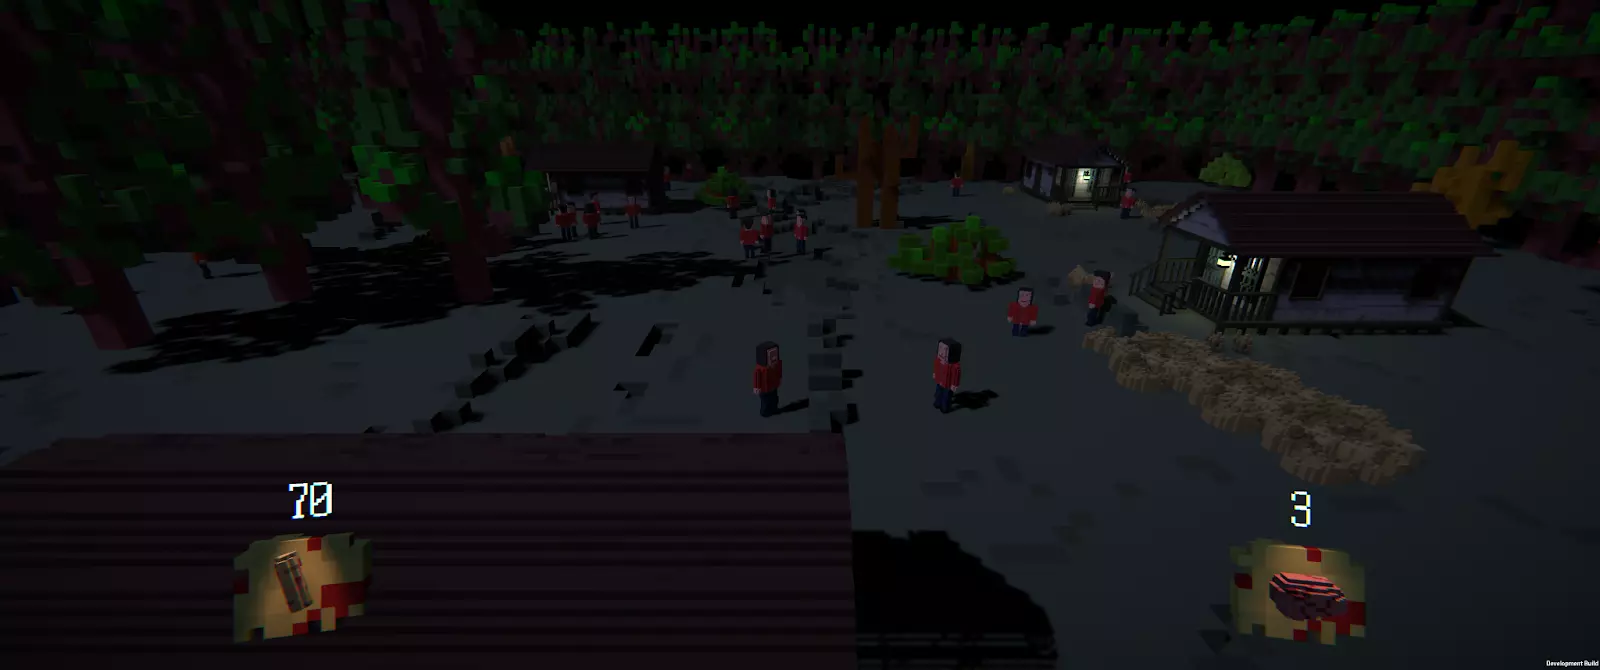 screenshot of the game (humans)